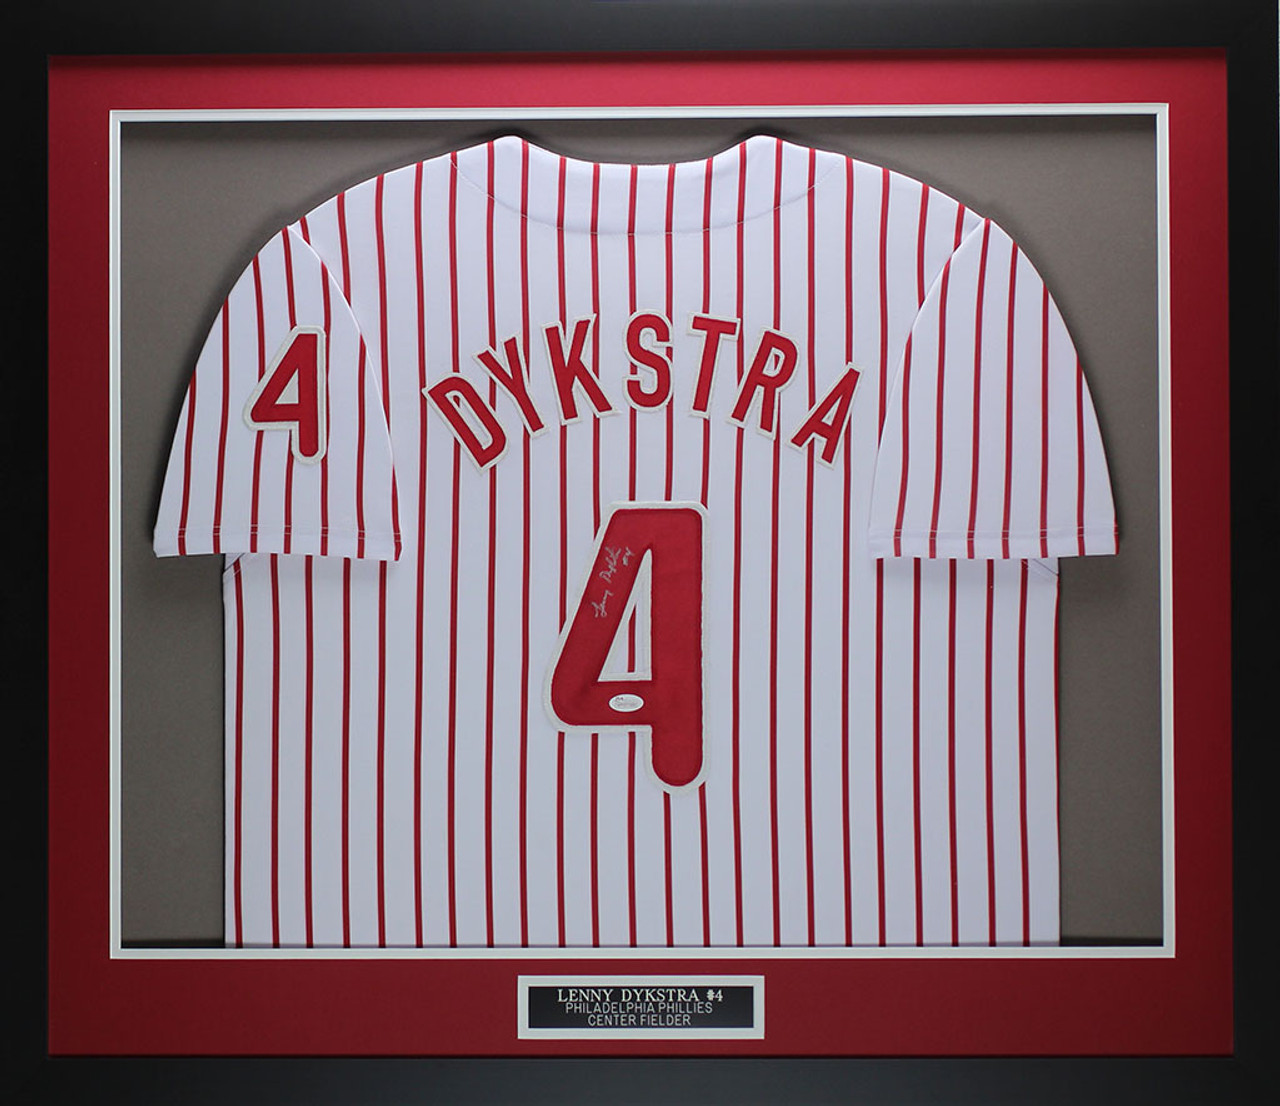 Lenny Dykstra Autographed & Framed Pinstriped Phillies Jersey